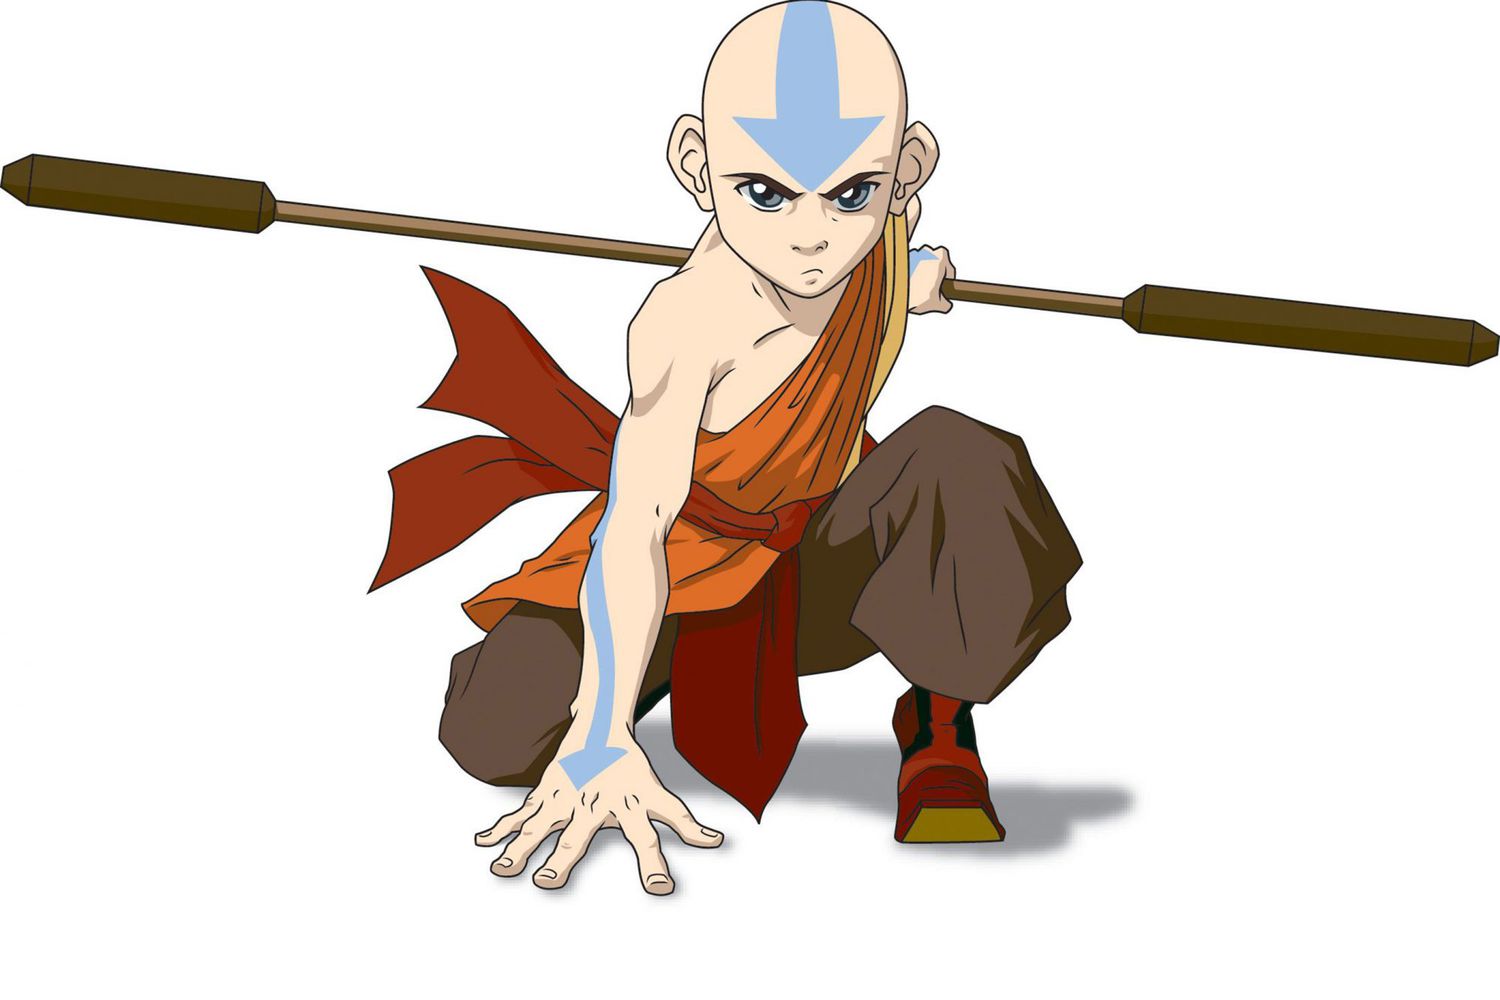 Avatar: The Last Airbender animated series coming to Netflix 